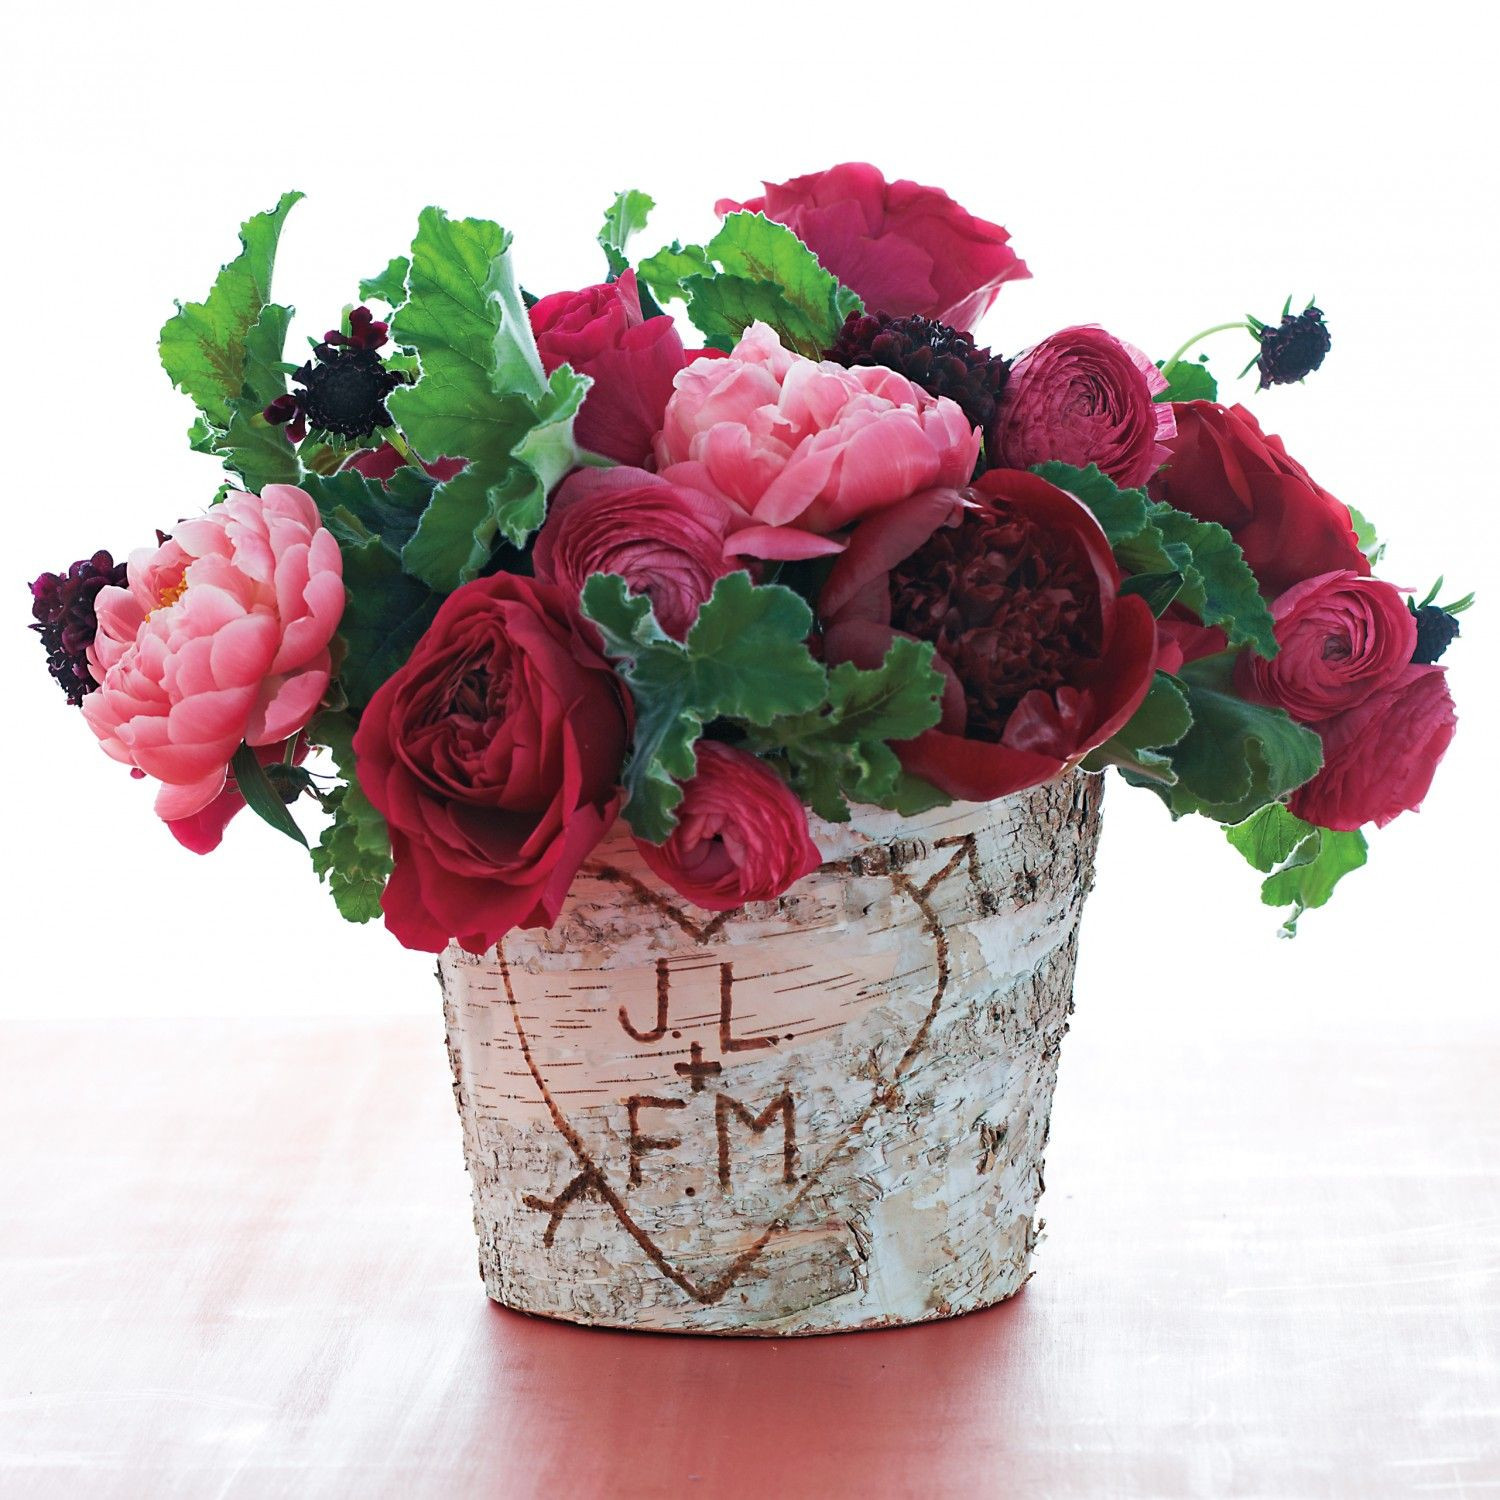 24 Elegant Birch Bark Vases for Weddings 2024 free download birch bark vases for weddings of birch love vase pinterest birch bark birch and barking f c in use a birch bark vase and a wood burning tool to mimic the romance of initials carved into a tr